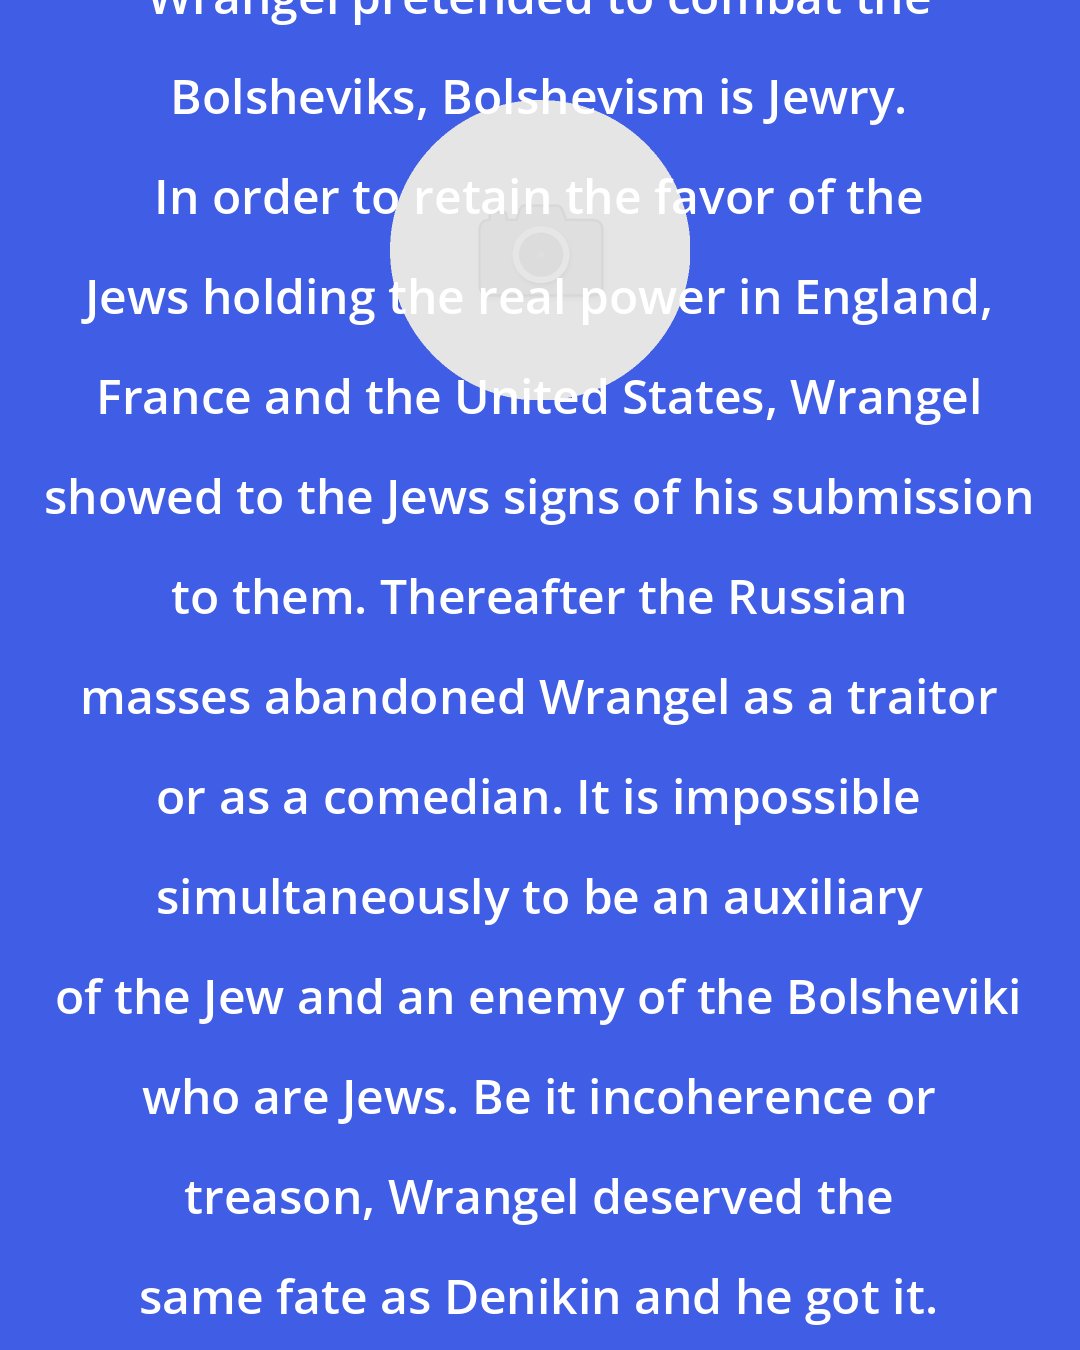 Boris Brasol: Wrangel pretended to combat the Bolsheviks, Bolshevism is Jewry. In order to retain the favor of the Jews holding the real power in England, France and the United States, Wrangel showed to the Jews signs of his submission to them. Thereafter the Russian masses abandoned Wrangel as a traitor or as a comedian. It is impossible simultaneously to be an auxiliary of the Jew and an enemy of the Bolsheviki who are Jews. Be it incoherence or treason, Wrangel deserved the same fate as Denikin and he got it.